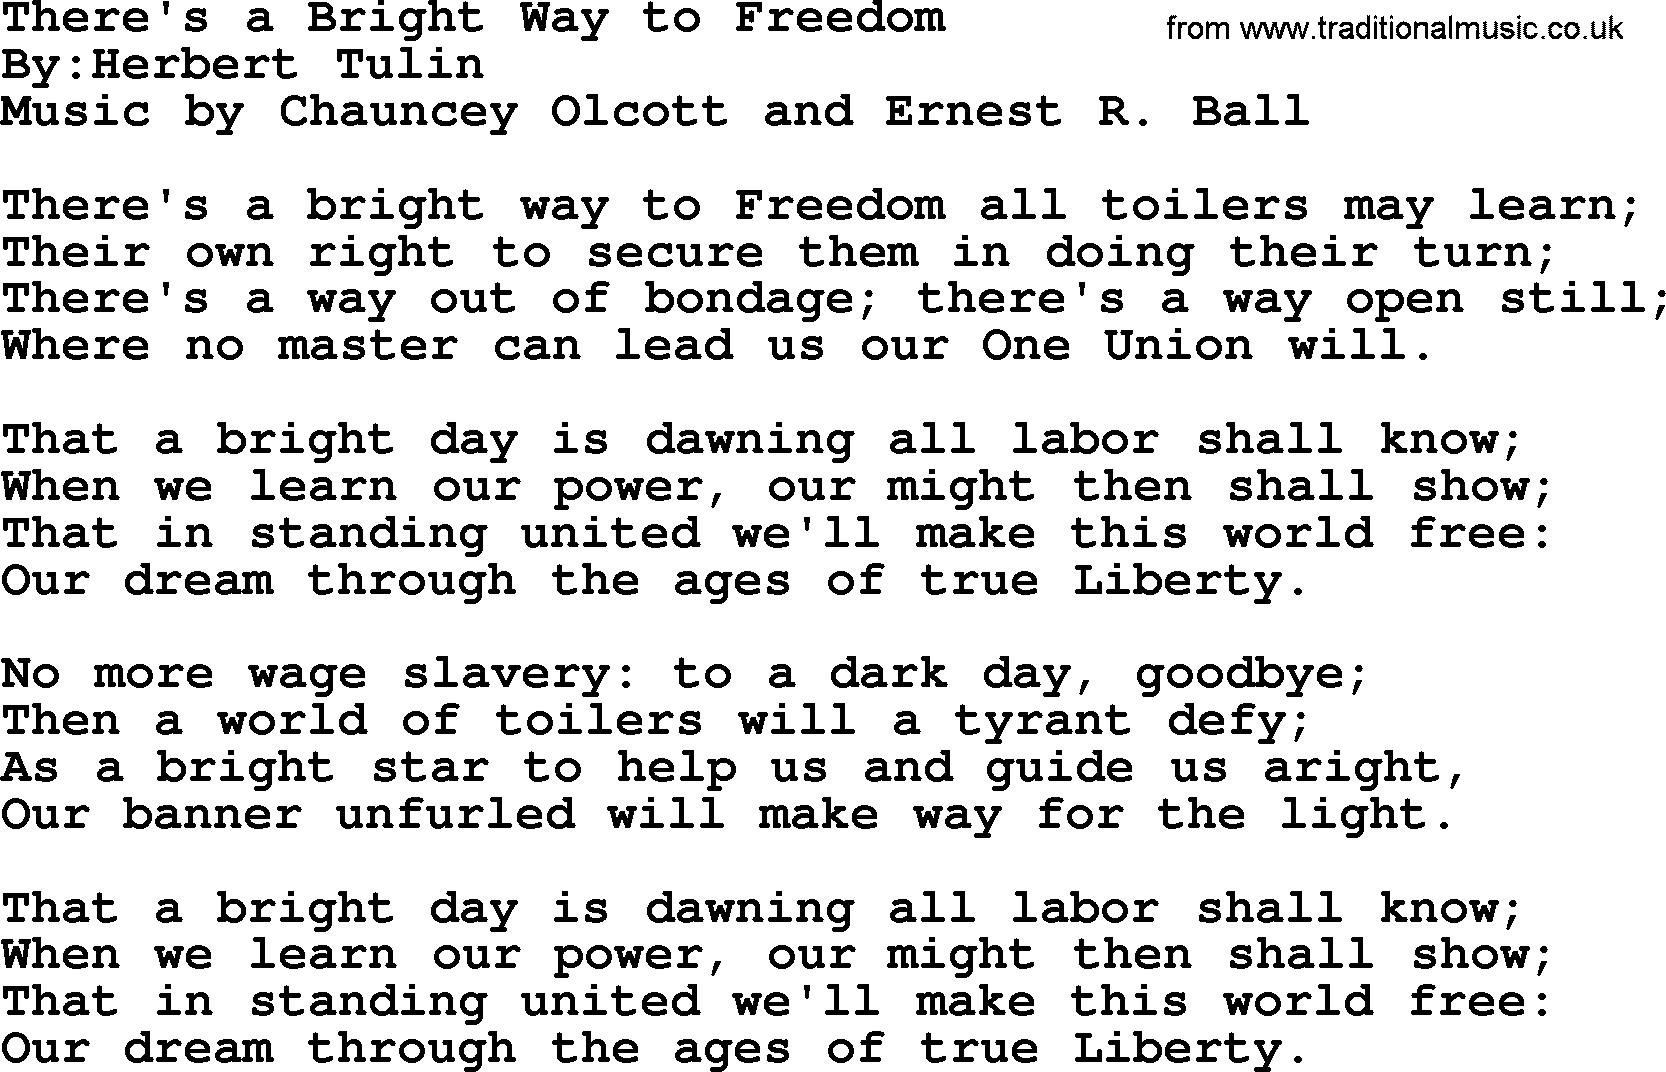 Political, Solidarity, Workers or Union song: Theres A Bright Way To Freedom, lyrics